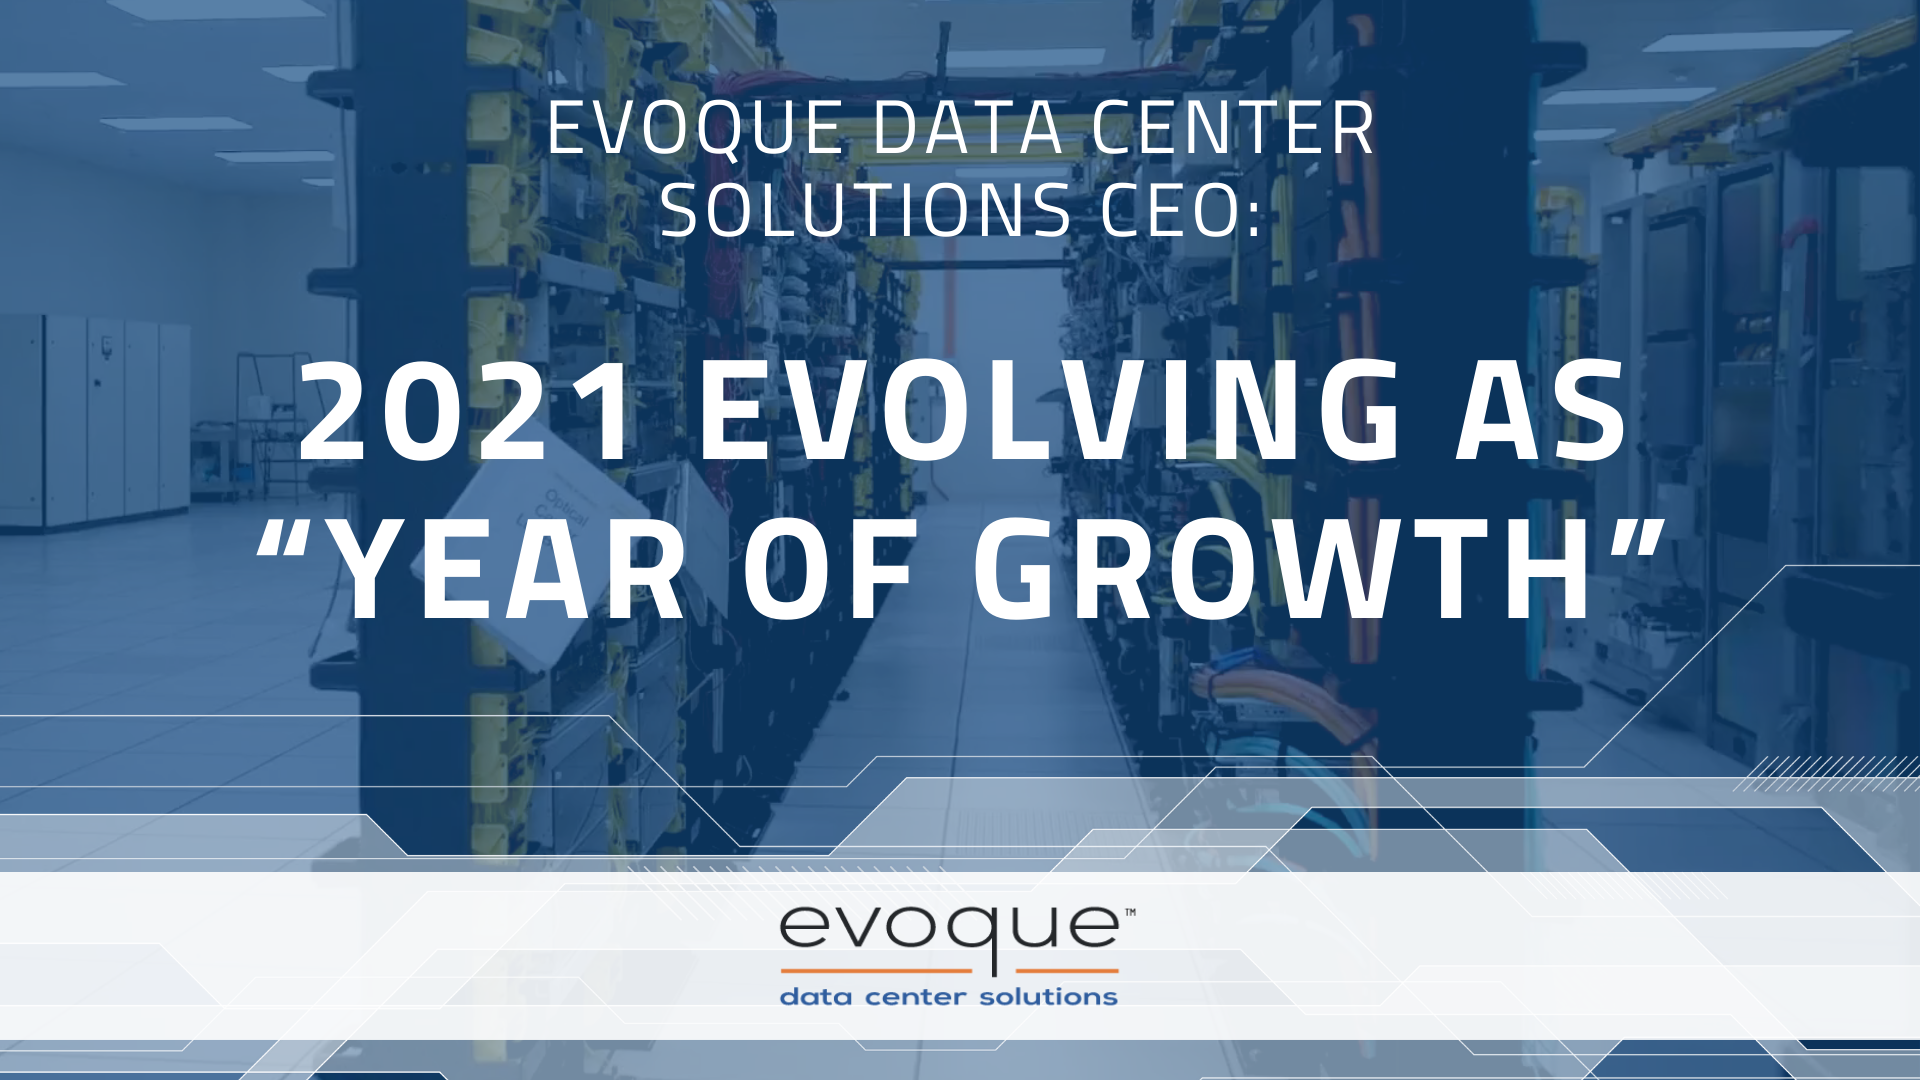 Evoque Data Center Solutions CEO: 2021 Evolving As “Year Of Growth”